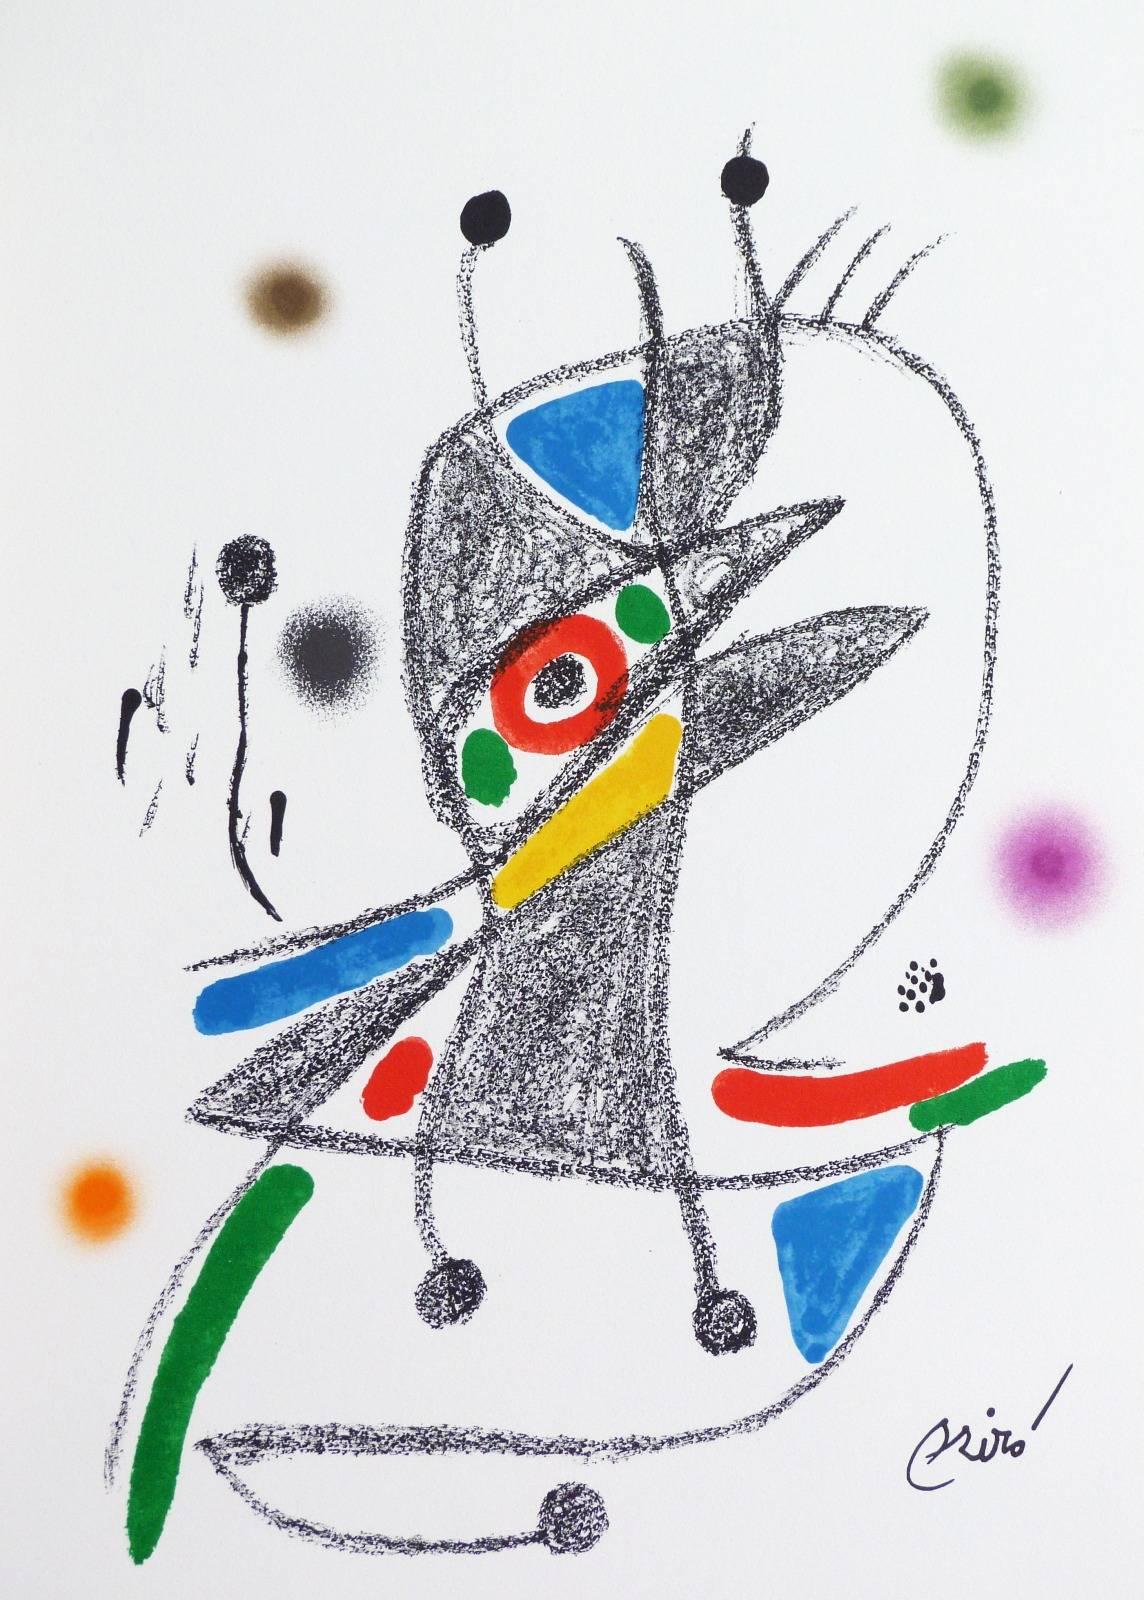 Joan Miró Abstract Print - Abstract Composition in black blue red yellow brown orange and green, 1975